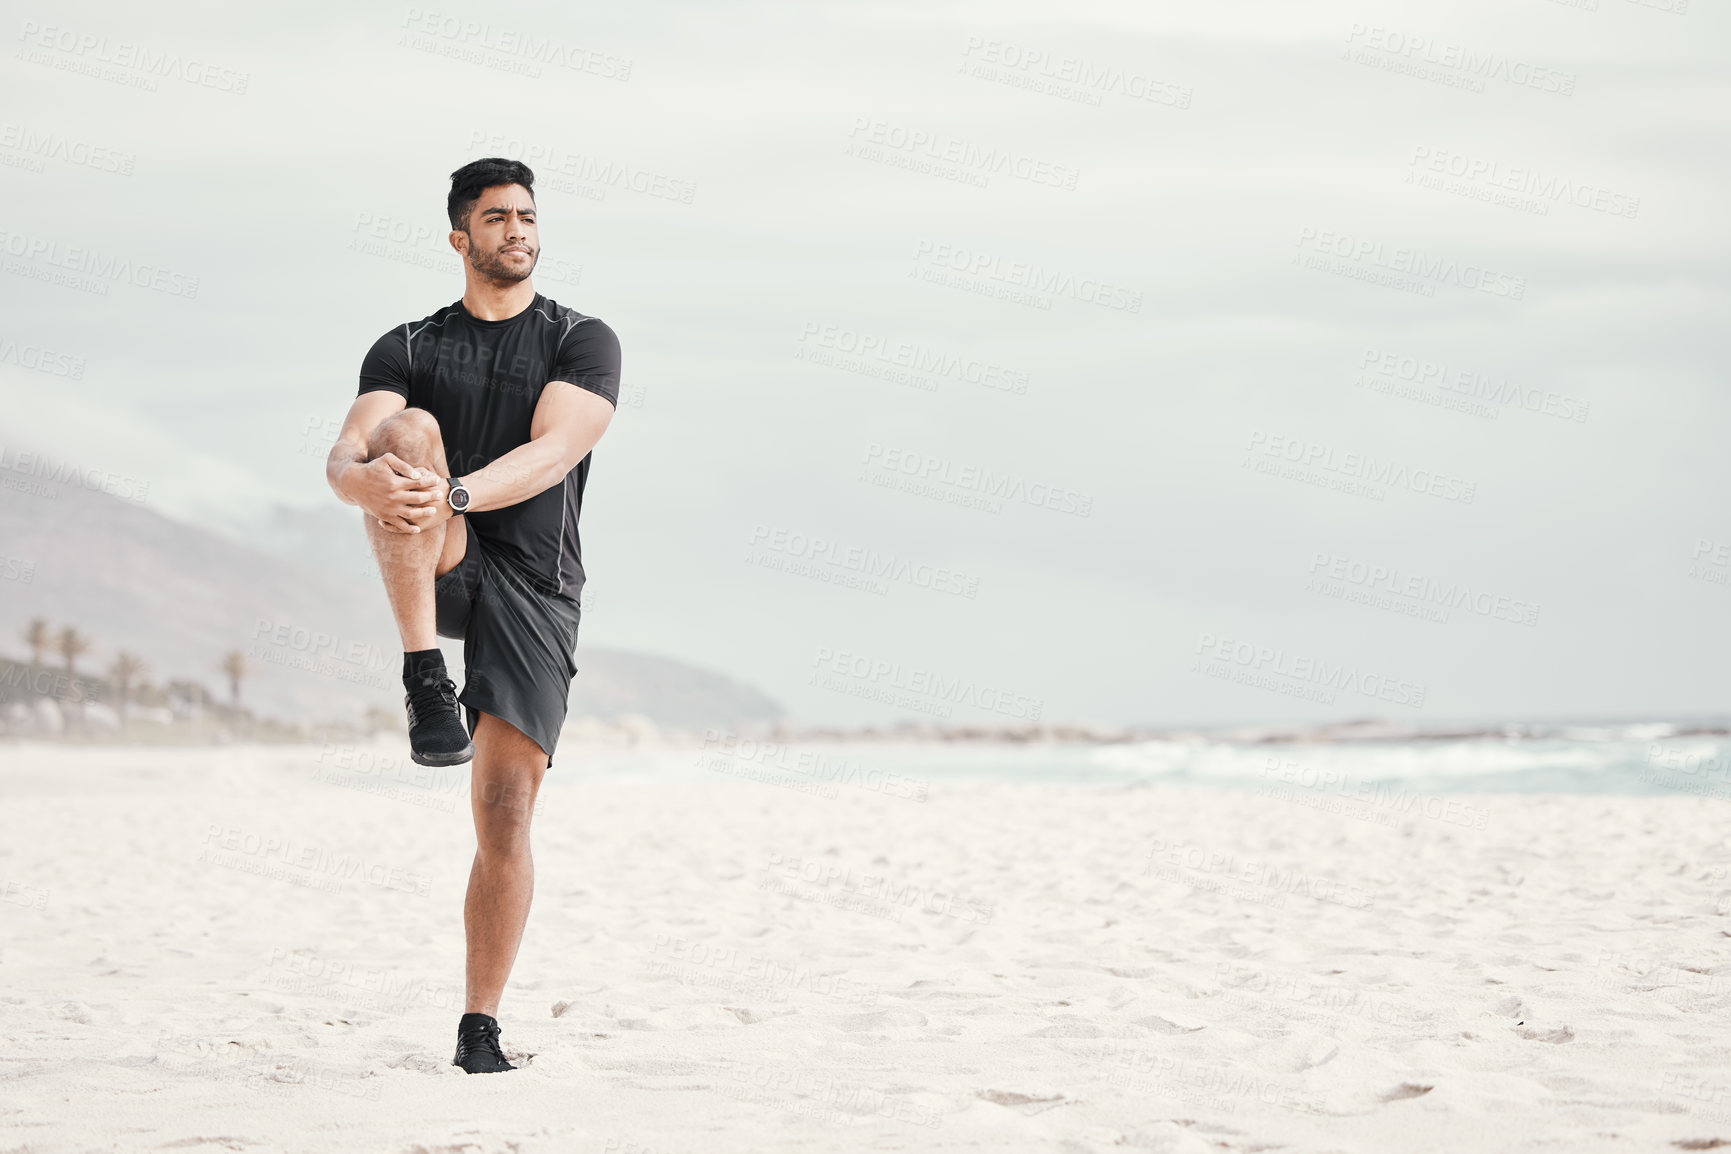 Buy stock photo Sea, balance or man stretching legs with fitness for body flexibility, thinking or wellness in running practice. Beach, sky or sports athlete ready for workout, mobility training or exercise warm up